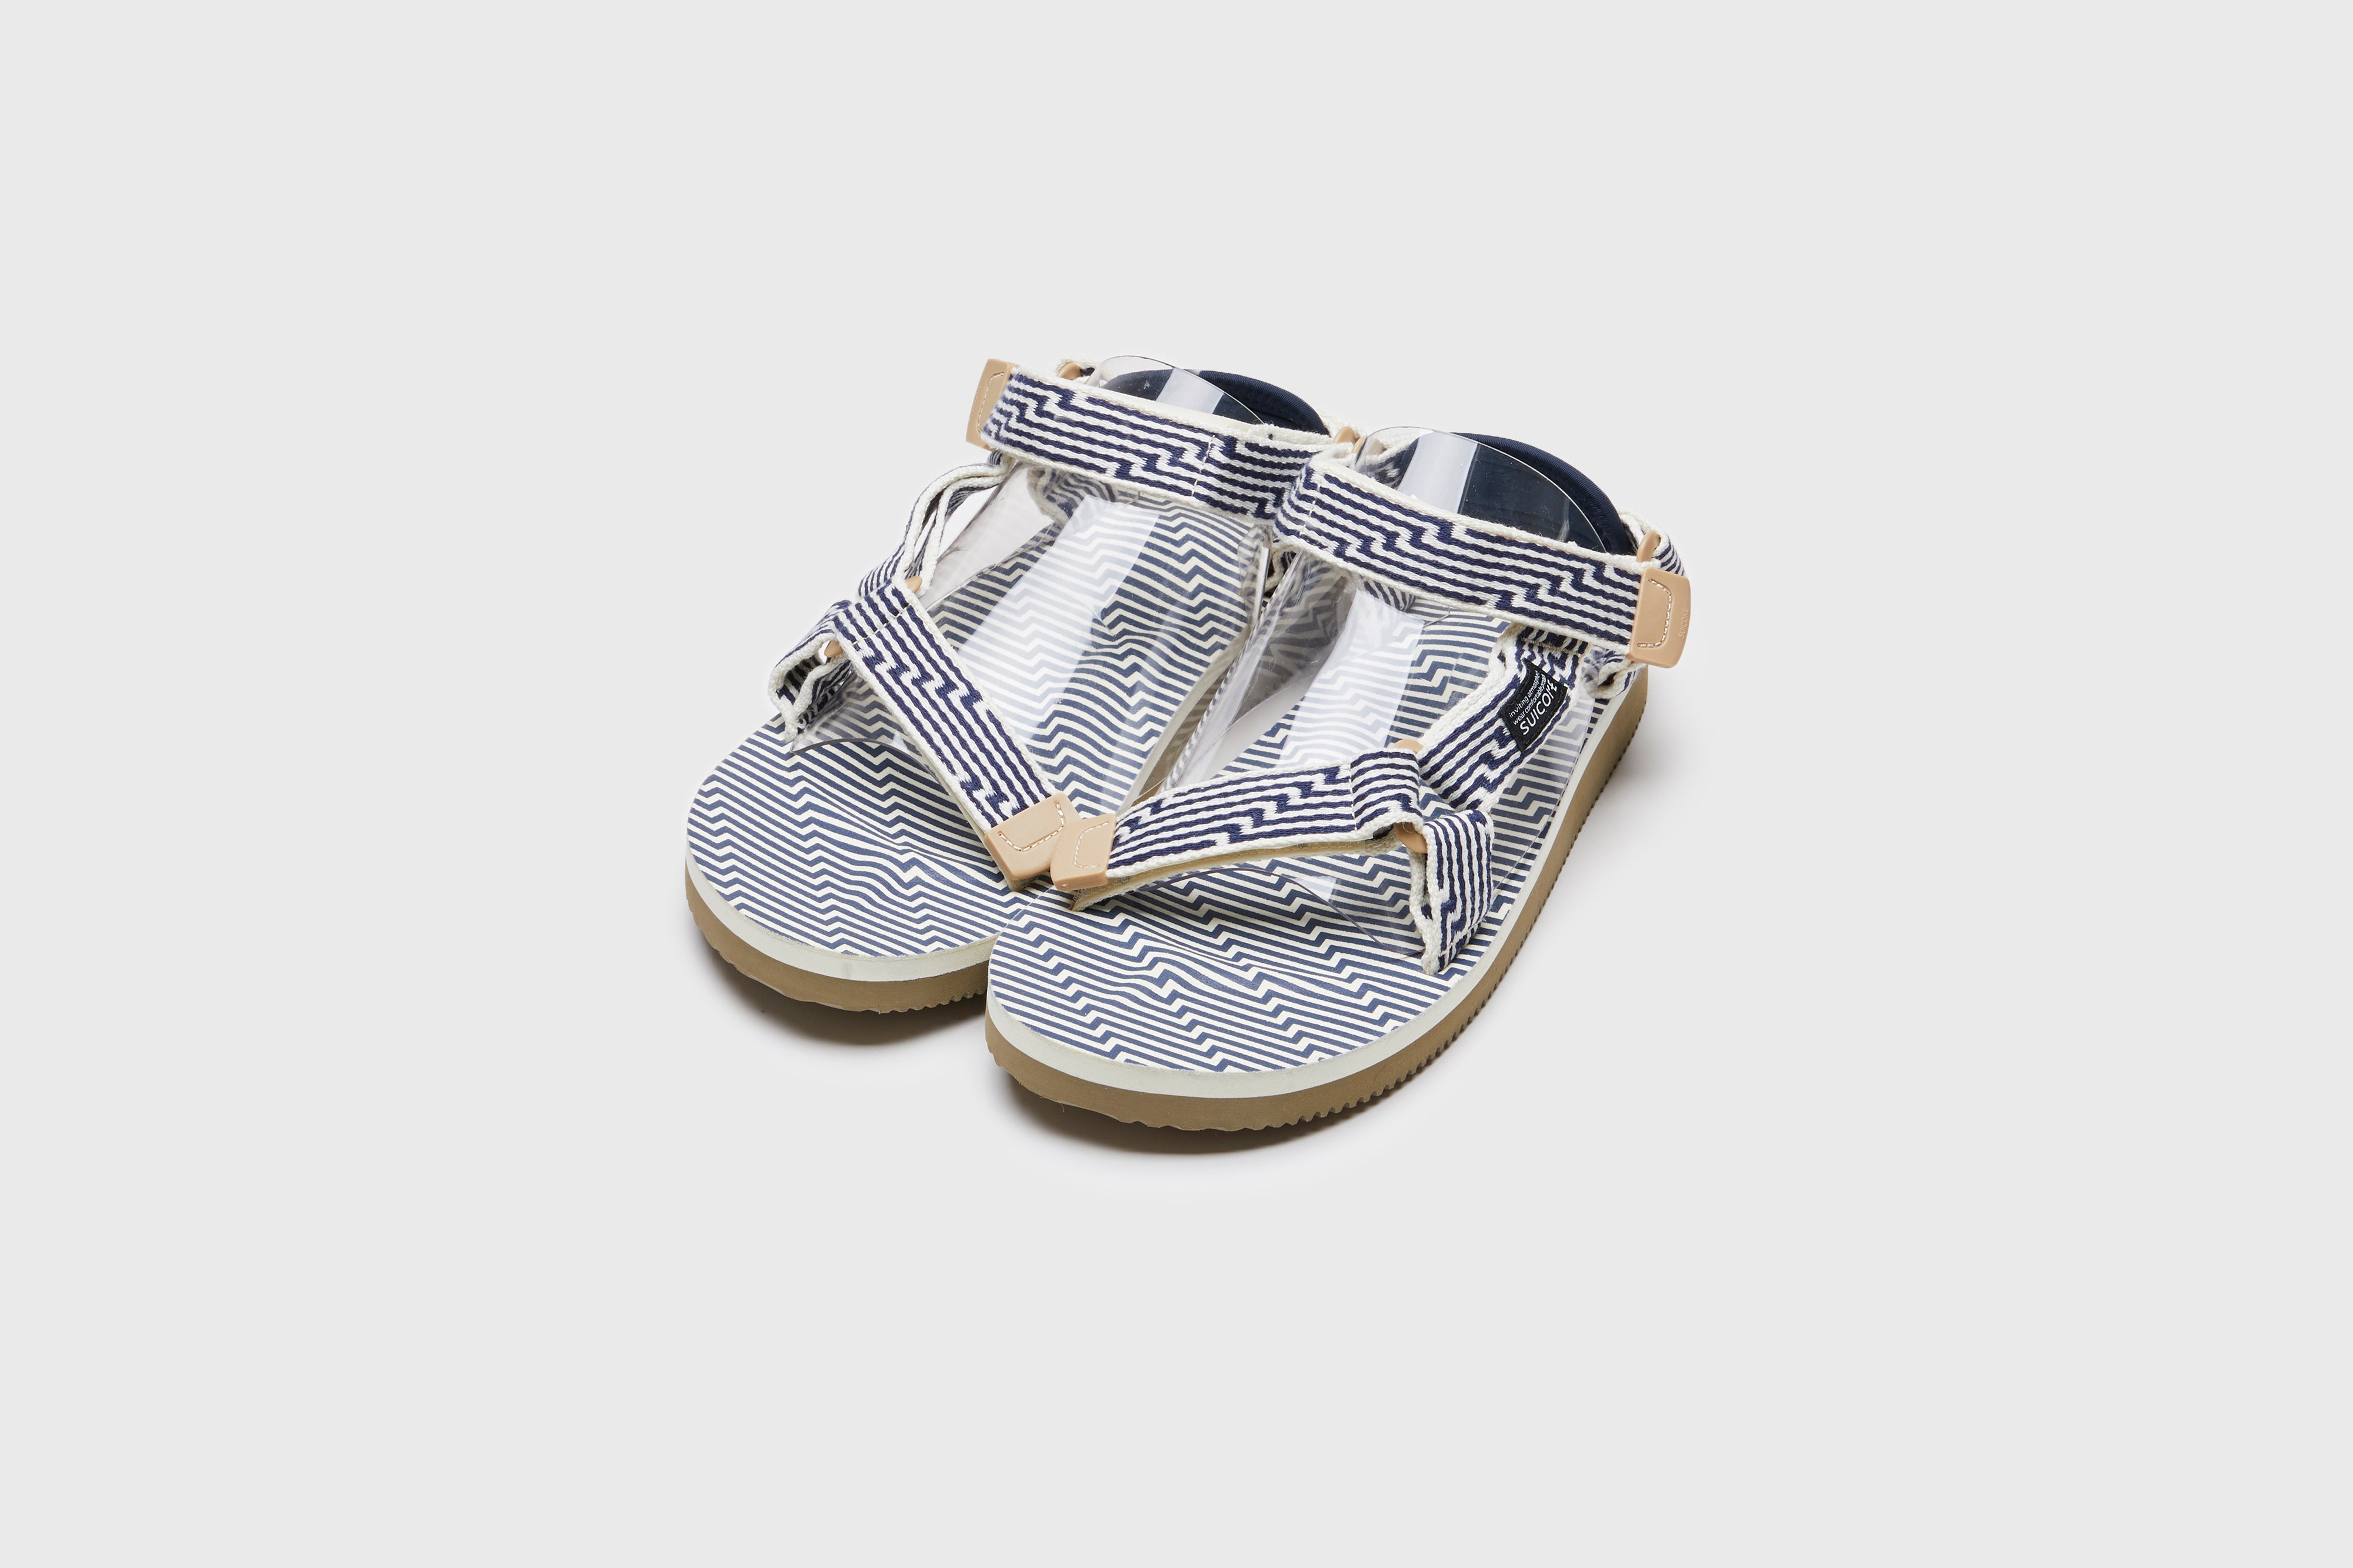 SUICOKE DEPA-JC01 sandals with ivory & navy nylon upper, ivory & navy midsole and sole, strap and logo patch. From Spring/Summer 2023 collection on eightywingold Web Store, an official partner of SUICOKE. OG-022-JC01 IVORY X NAVY